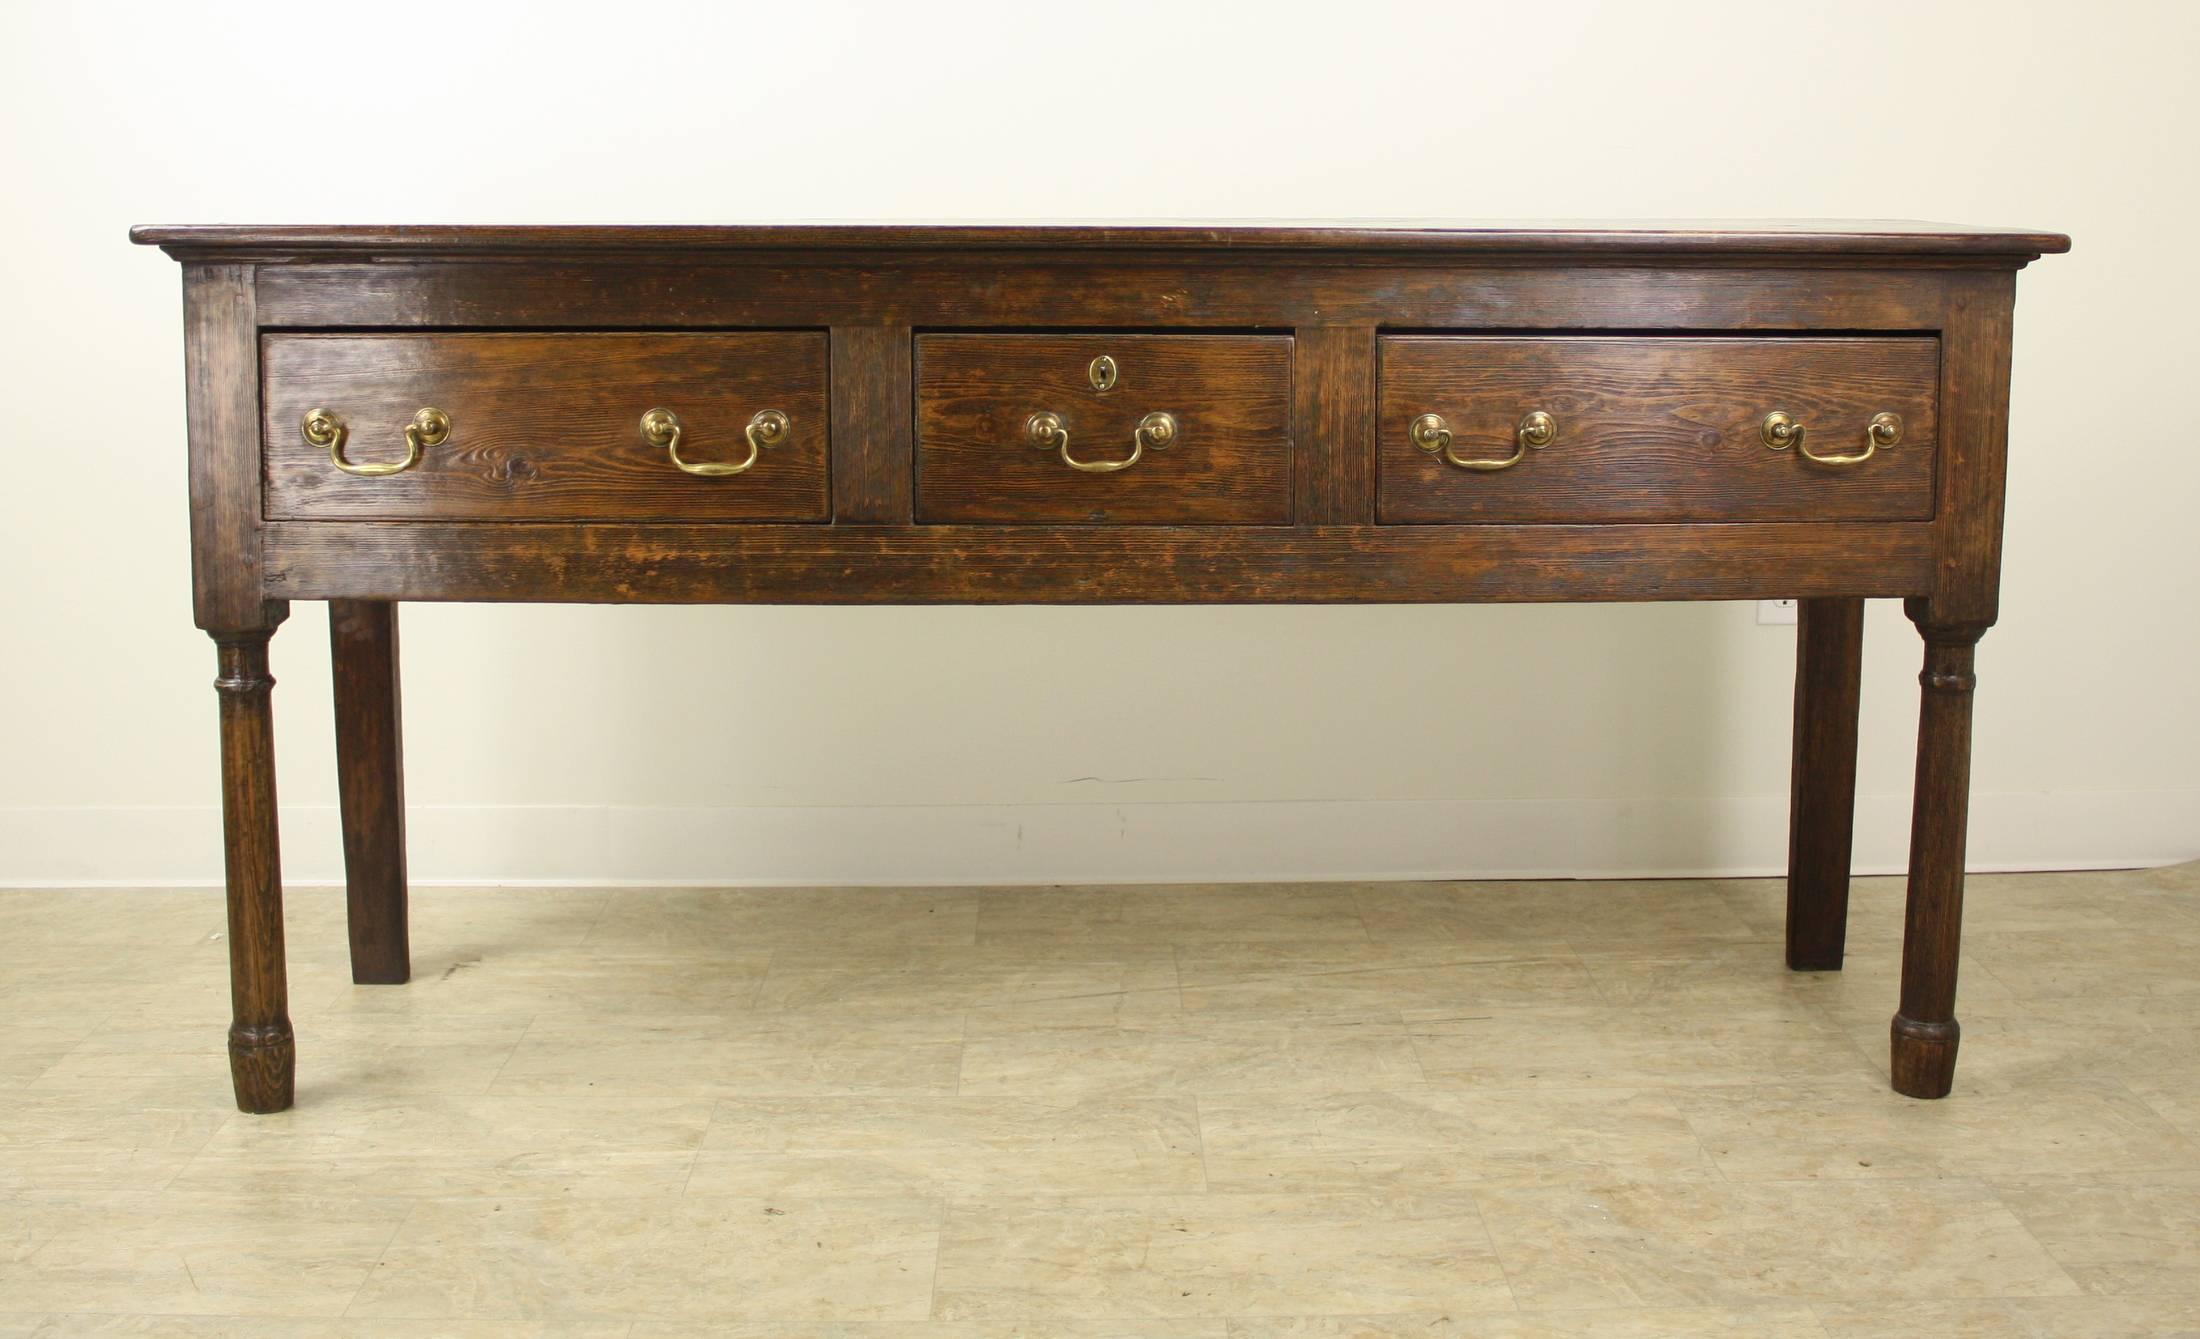 One of our finest servers! This console is an excellent example of Classic early Welsh period furniture, with stylish gun barrel legs, fabulous grain and lovely patina. The three roomy drawers slide easily and are in fine antique condition, as is